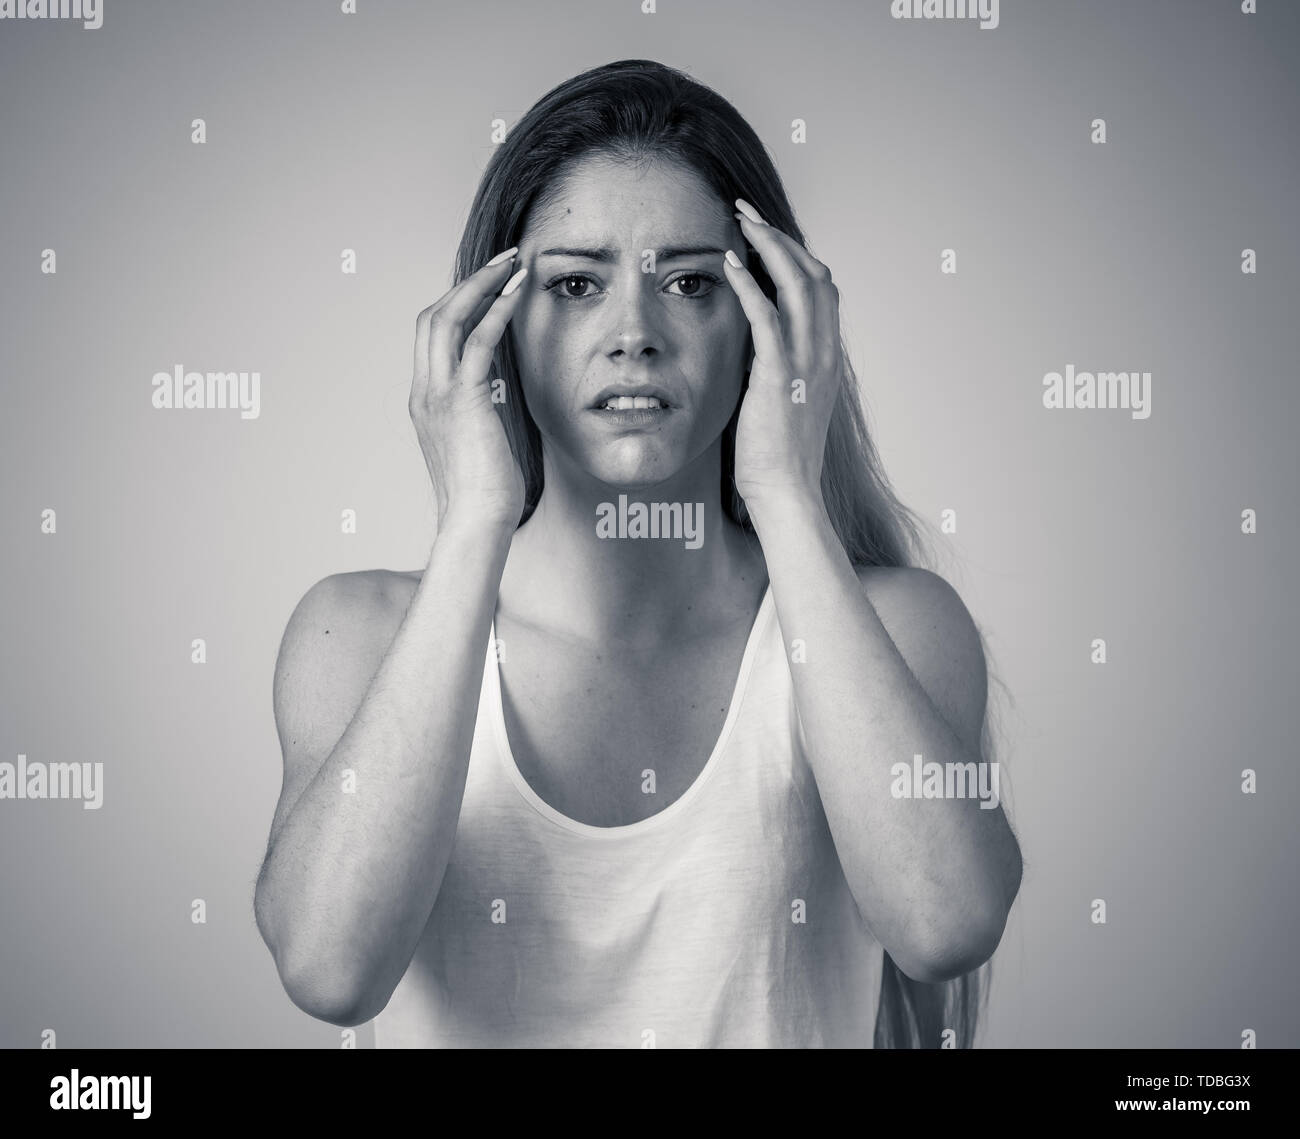 Young woman suffering from depression feeling miserable hopeless and suicidal. Portrait of depressed teen female crying in distress. Facial expression Stock Photo